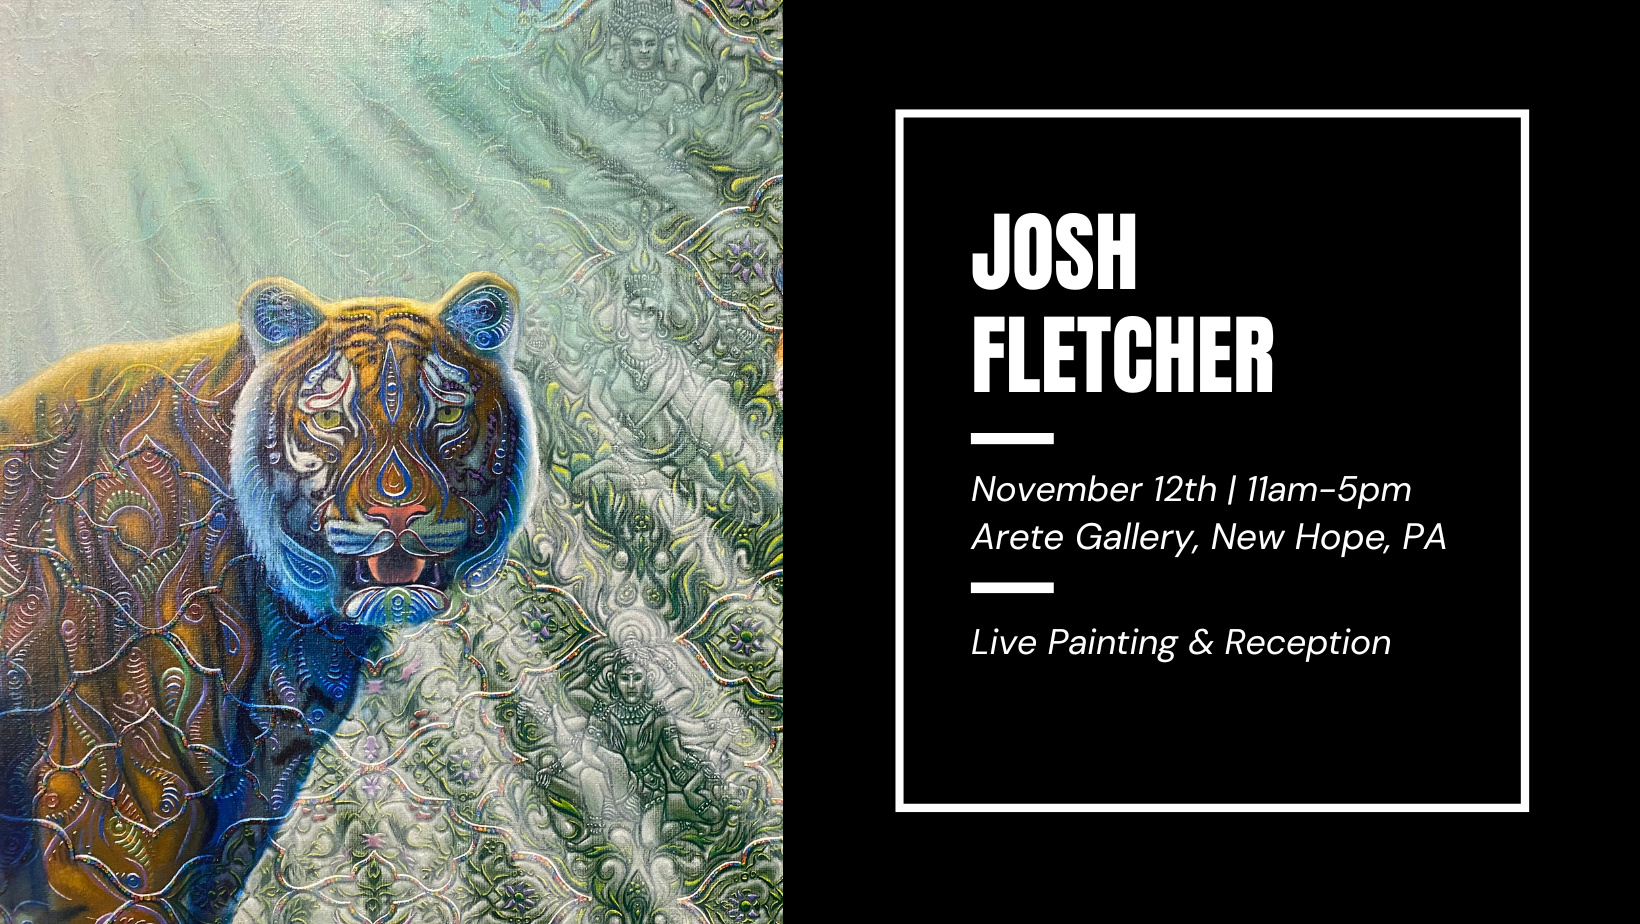 Live Painting & Reception Event at Arete Gallery in New Hope, PA: Josh Fletcher